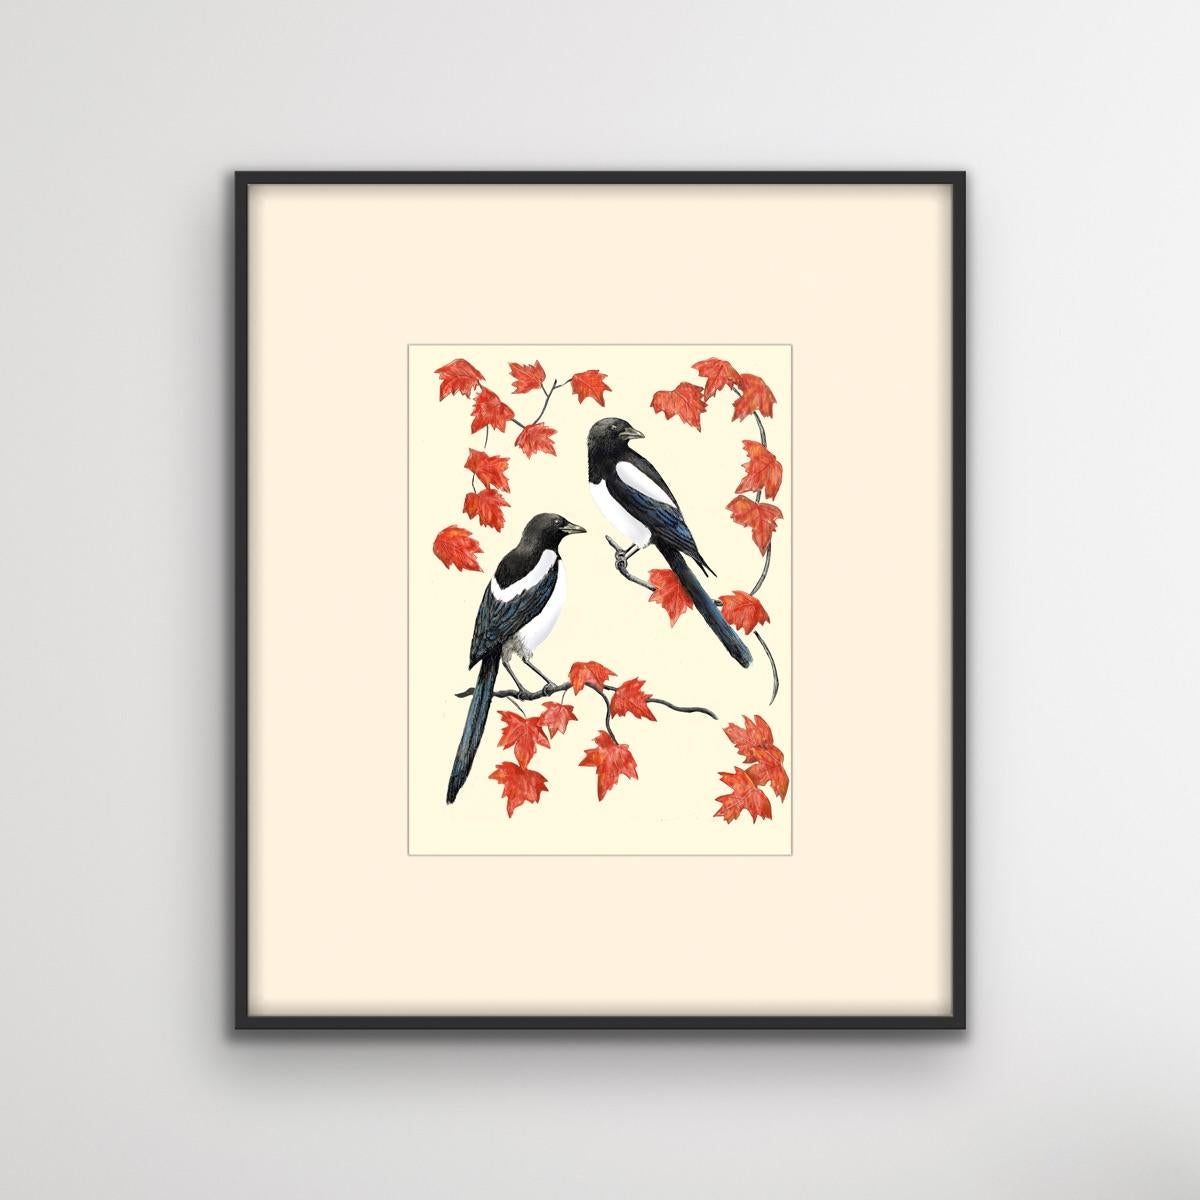 Two Magpies in a tree surrounded by red acer leaves on a cream background. I have made several images of Magpies. I think they are very striking birds and I like the colour combination of red, white, black and cream. The image has a oriental feel to